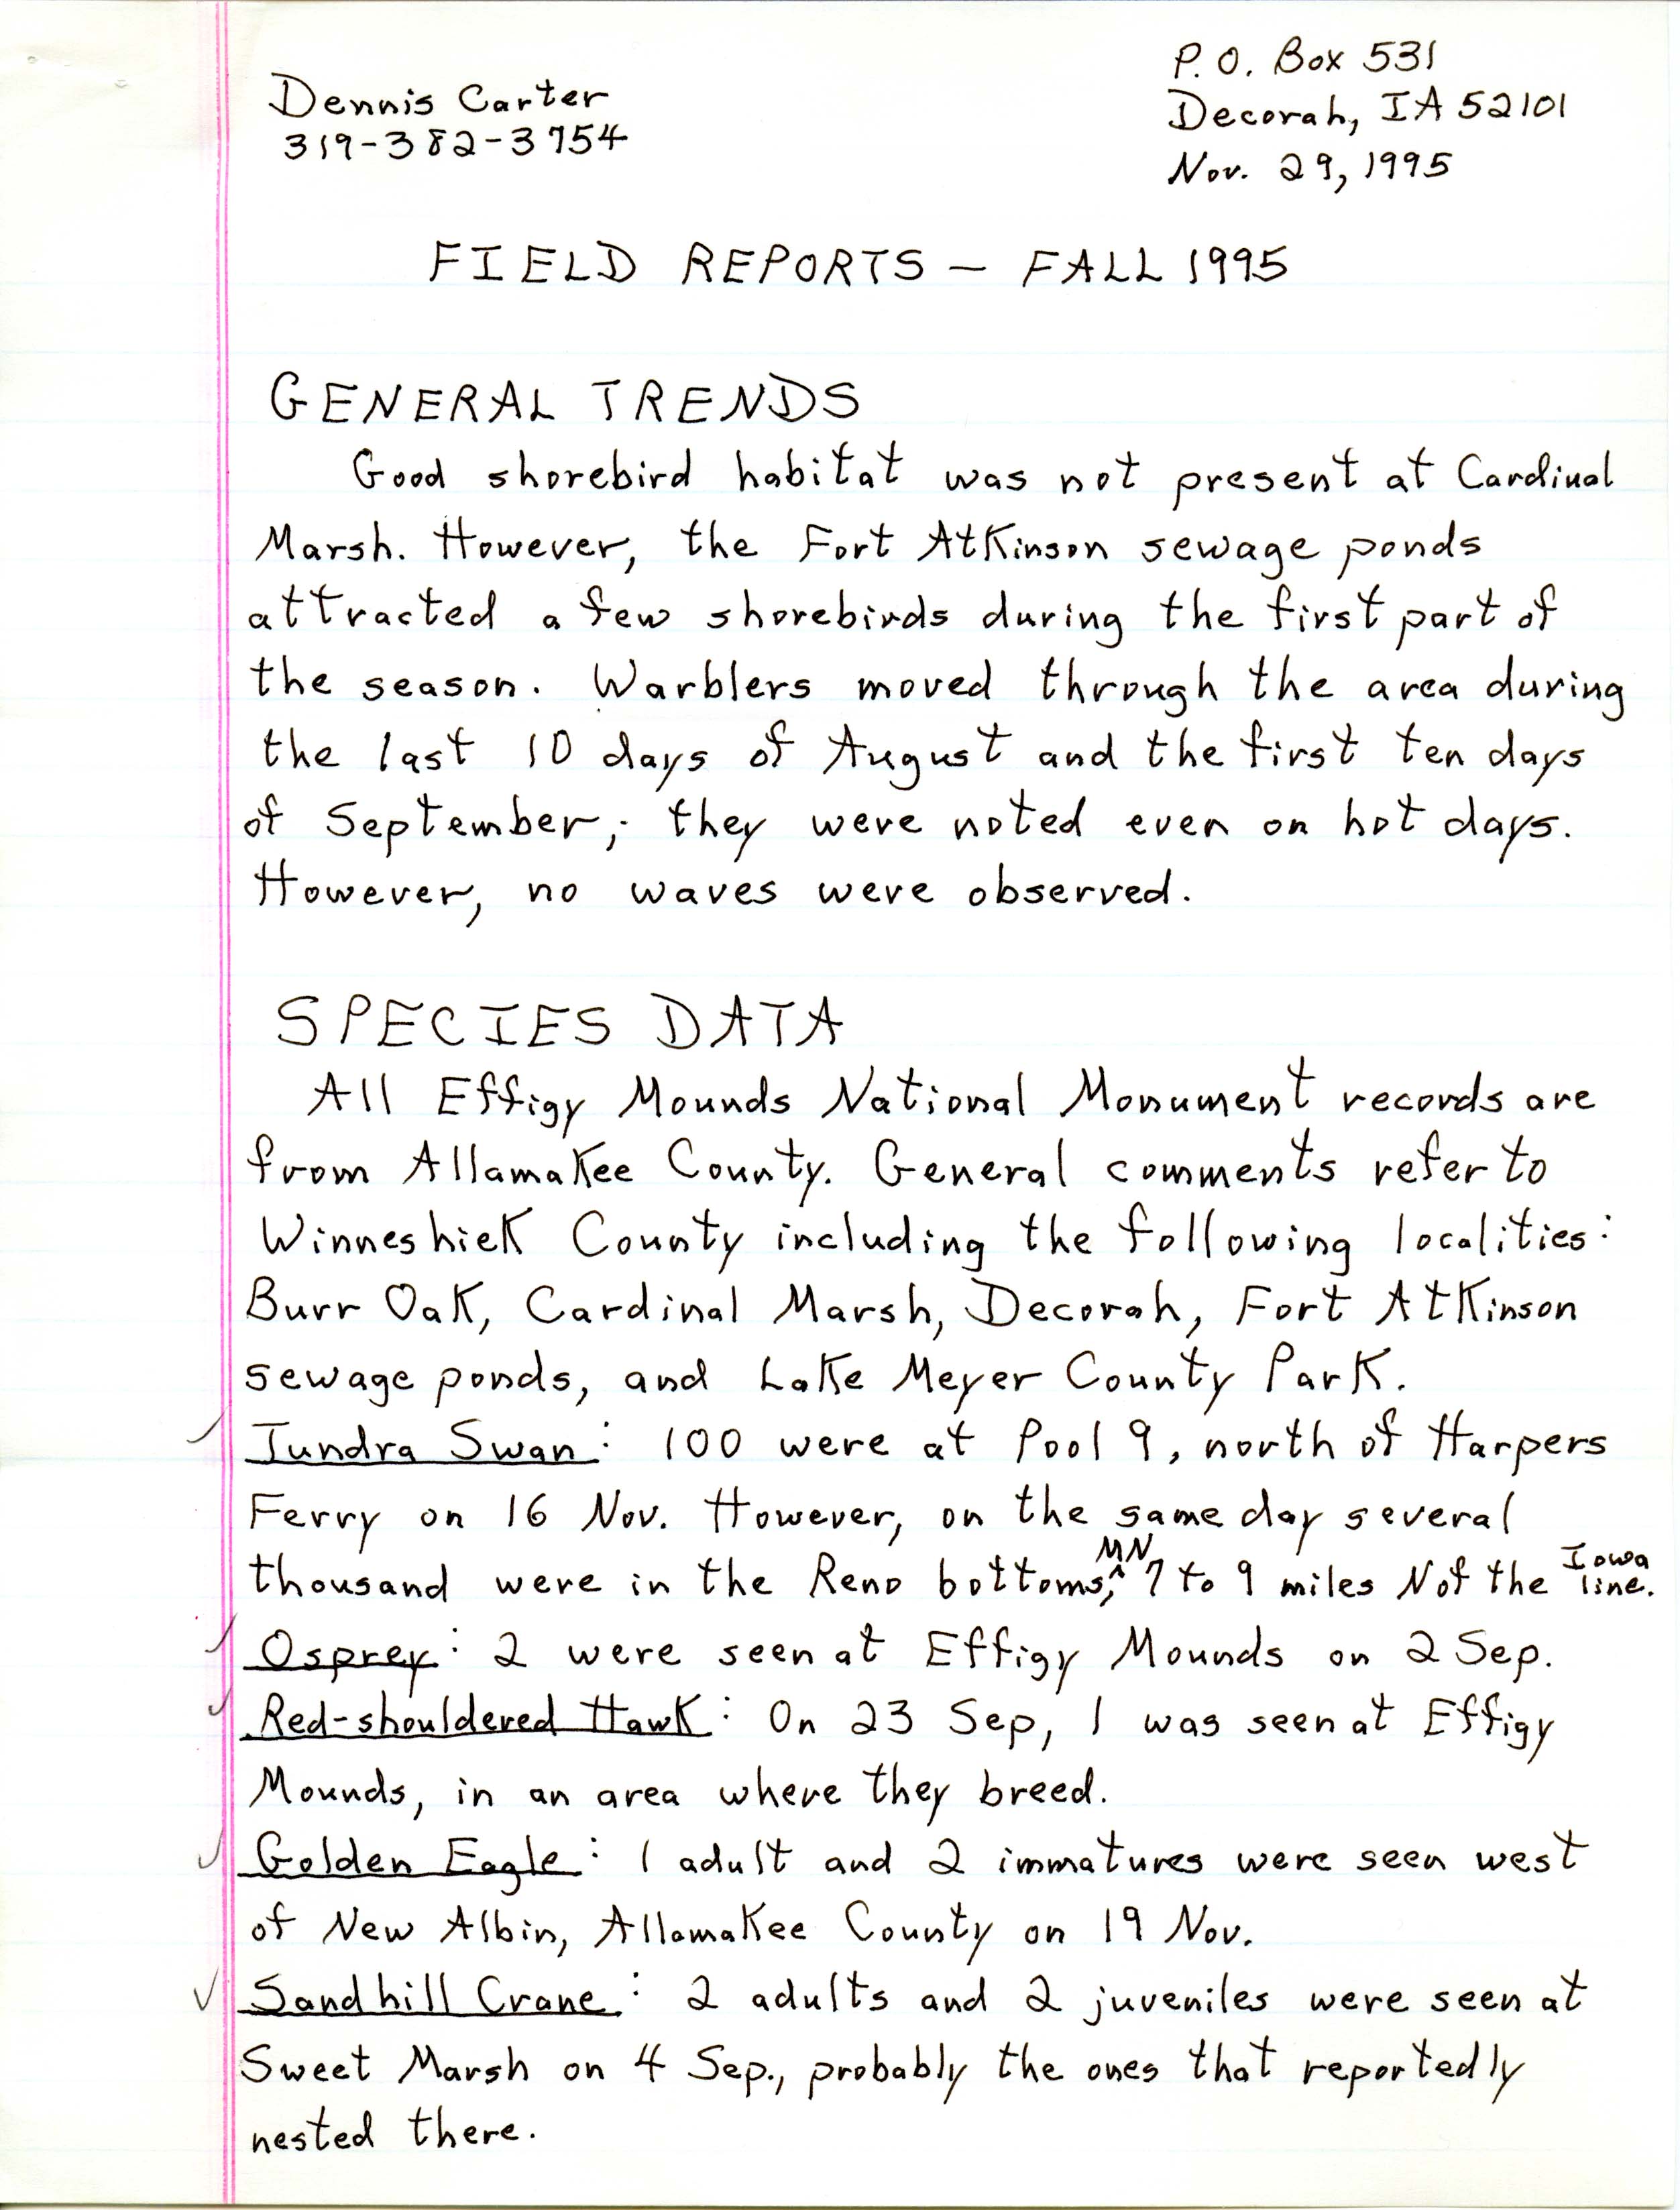 Field notes contributed by Dennis L. Carter, November 29, 1995